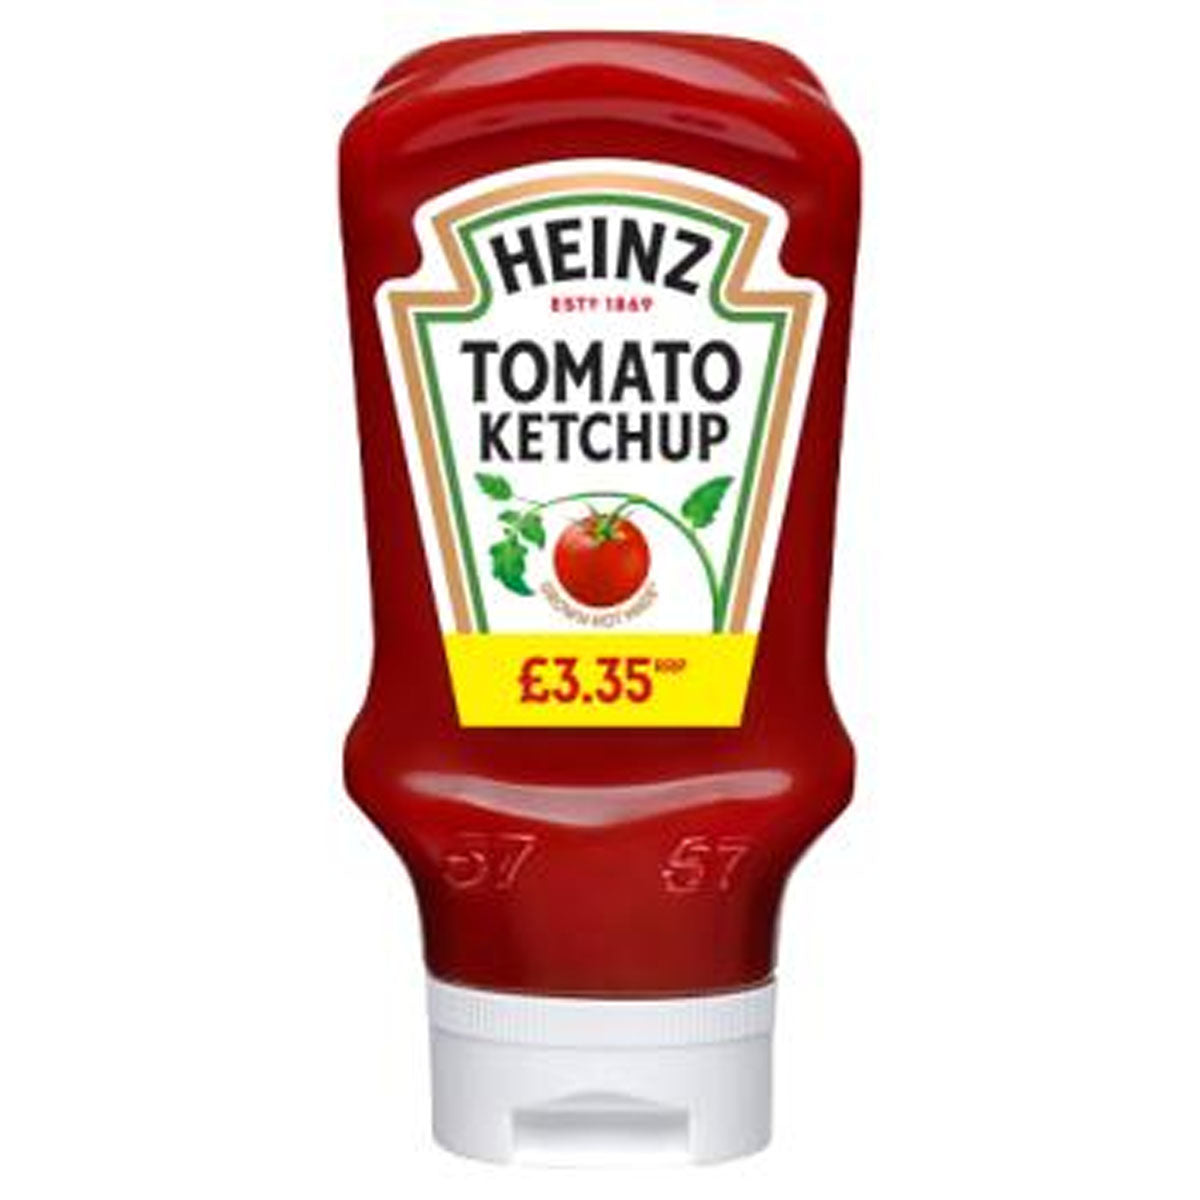 Heinz - Tomato Ketchup - 460g - Continental Food Store